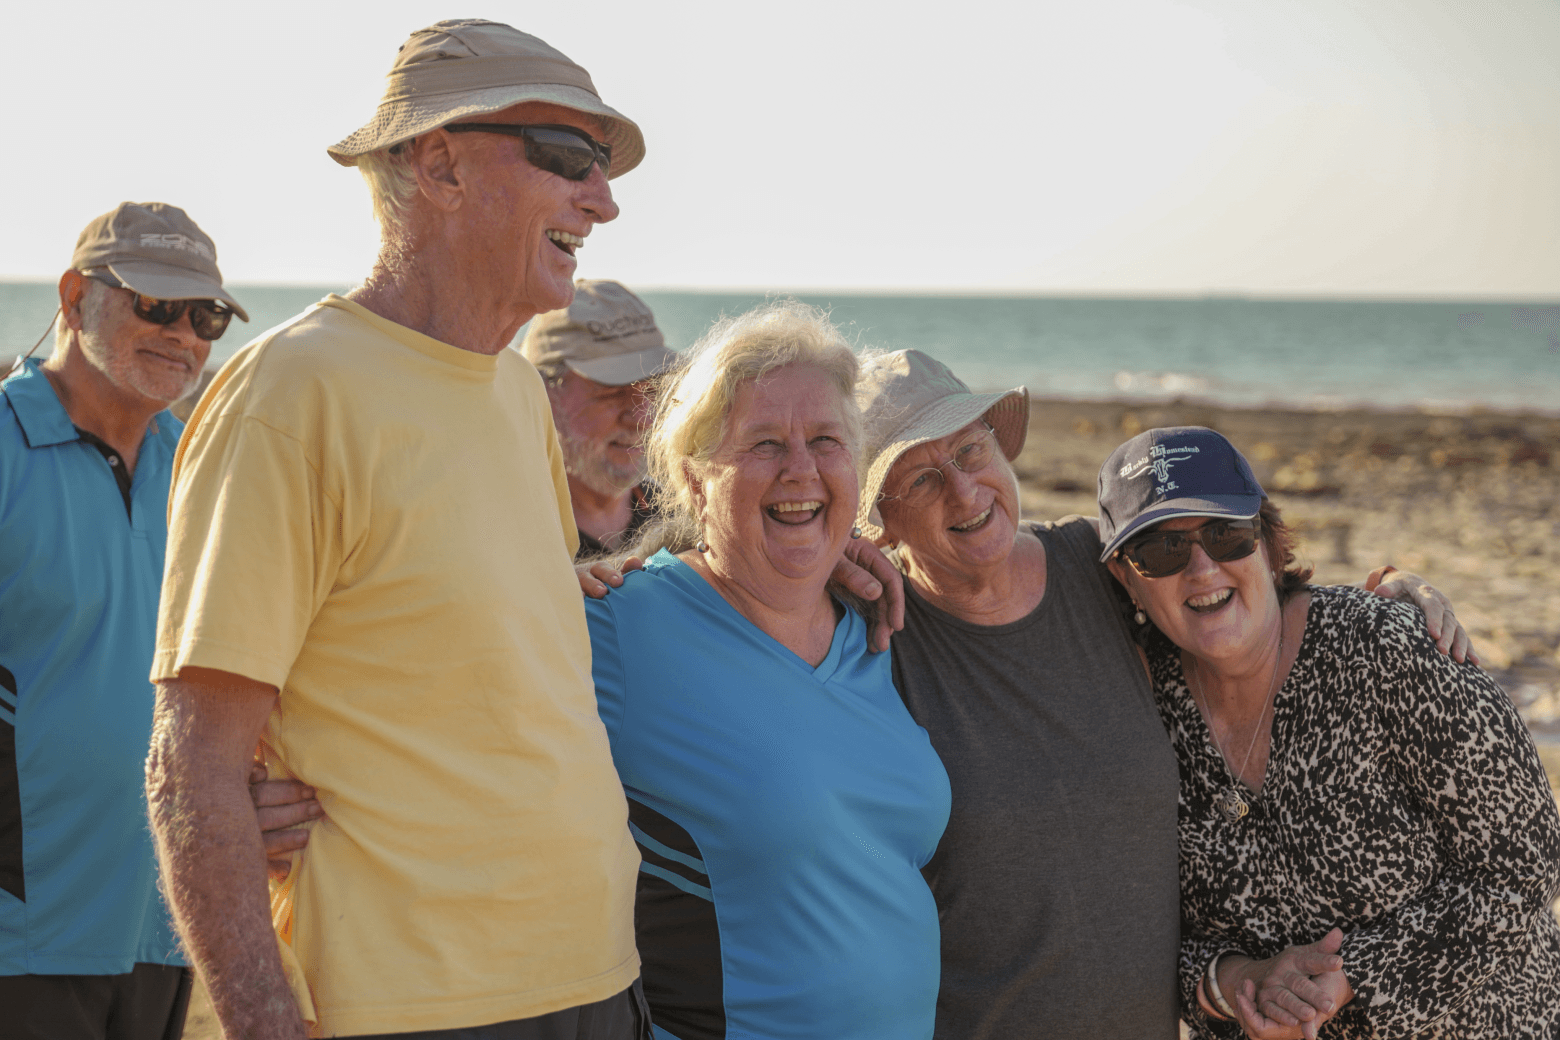 Some people standing at a beach with arms around each other smiling